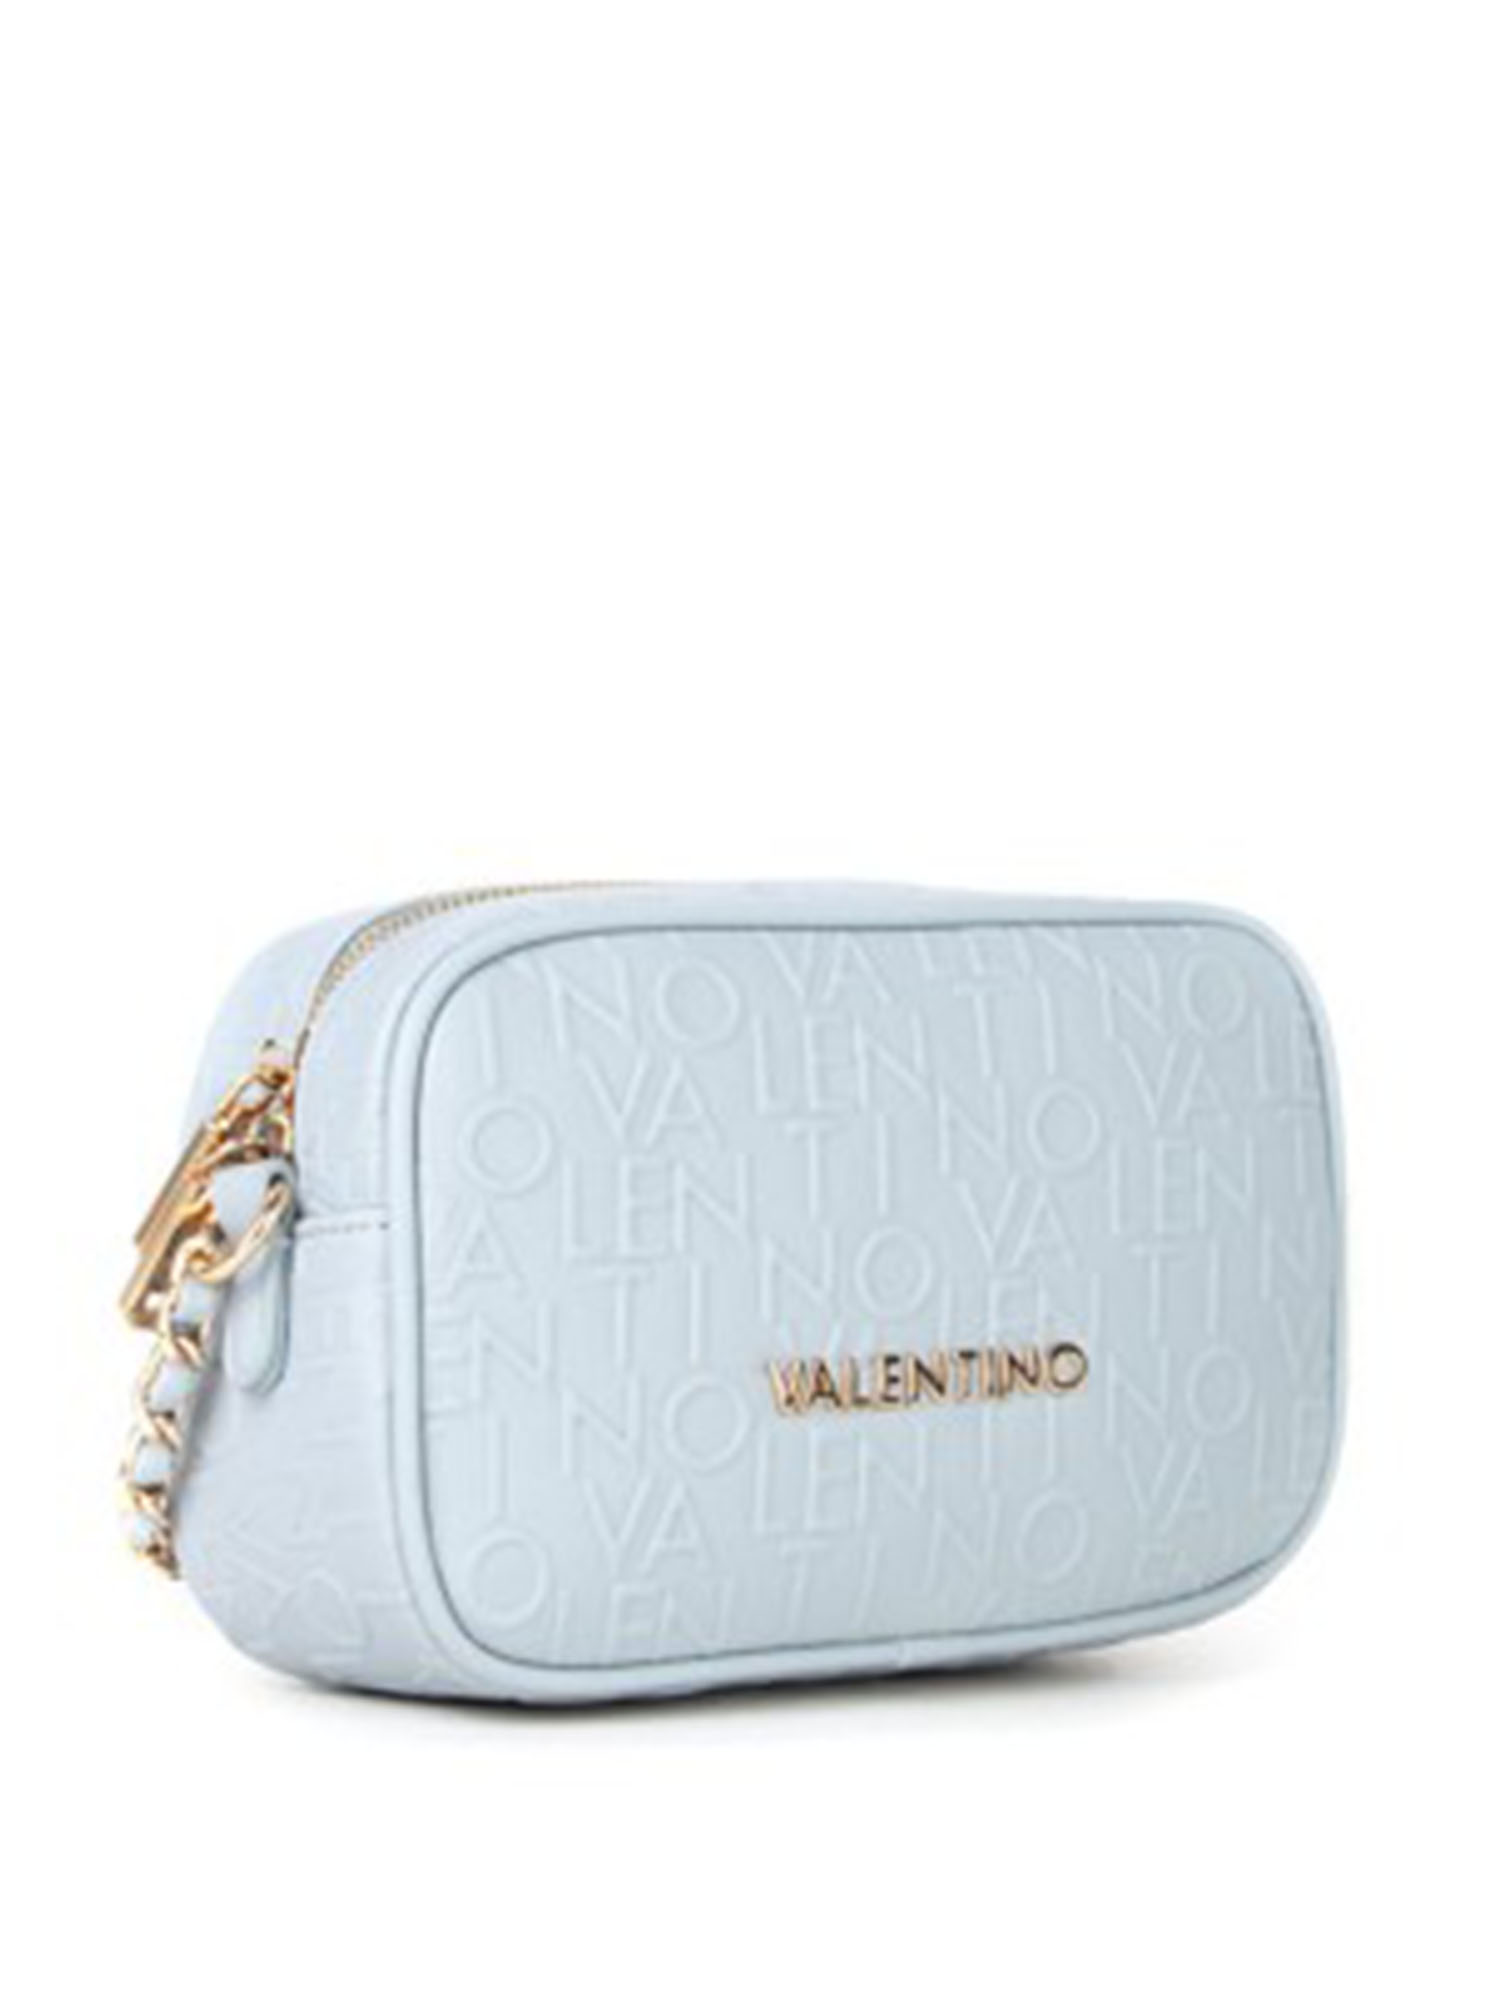 VALENTINO BAGS RELAX - POLVERE